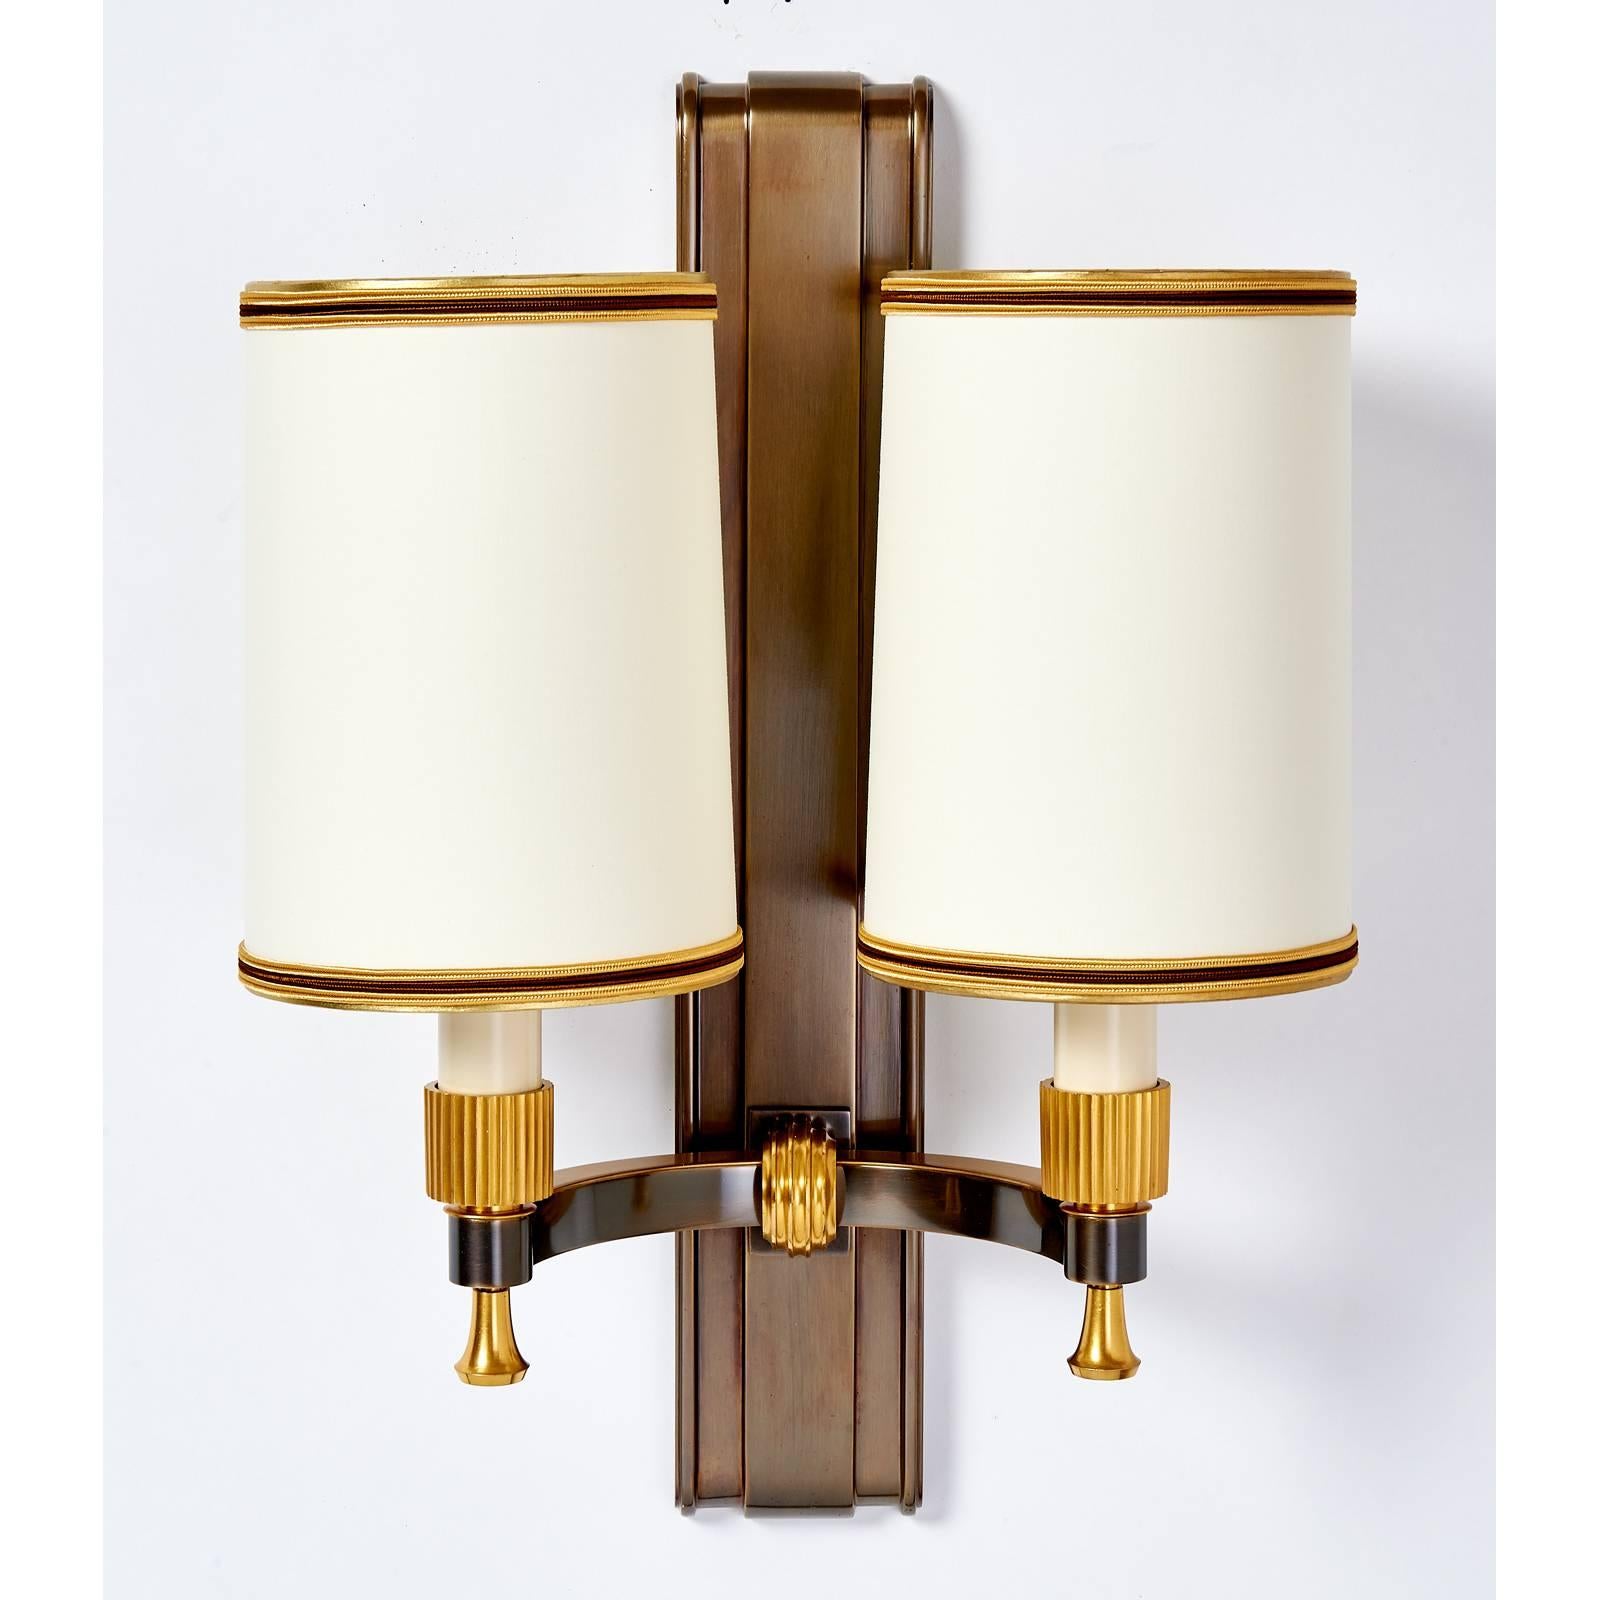 Maxime Old (1910-1991)
Stunning pair of gilt and oxidized bronze sconces with fluted mounts by Maxime Old
France, 1940s
Ref: Yves Badetz, Maxime Old, p.109, for this model
TWO PAIR AVAILABLE  Sold and priced by the pair
Dimensions: 12.5 W x 7.5 D x